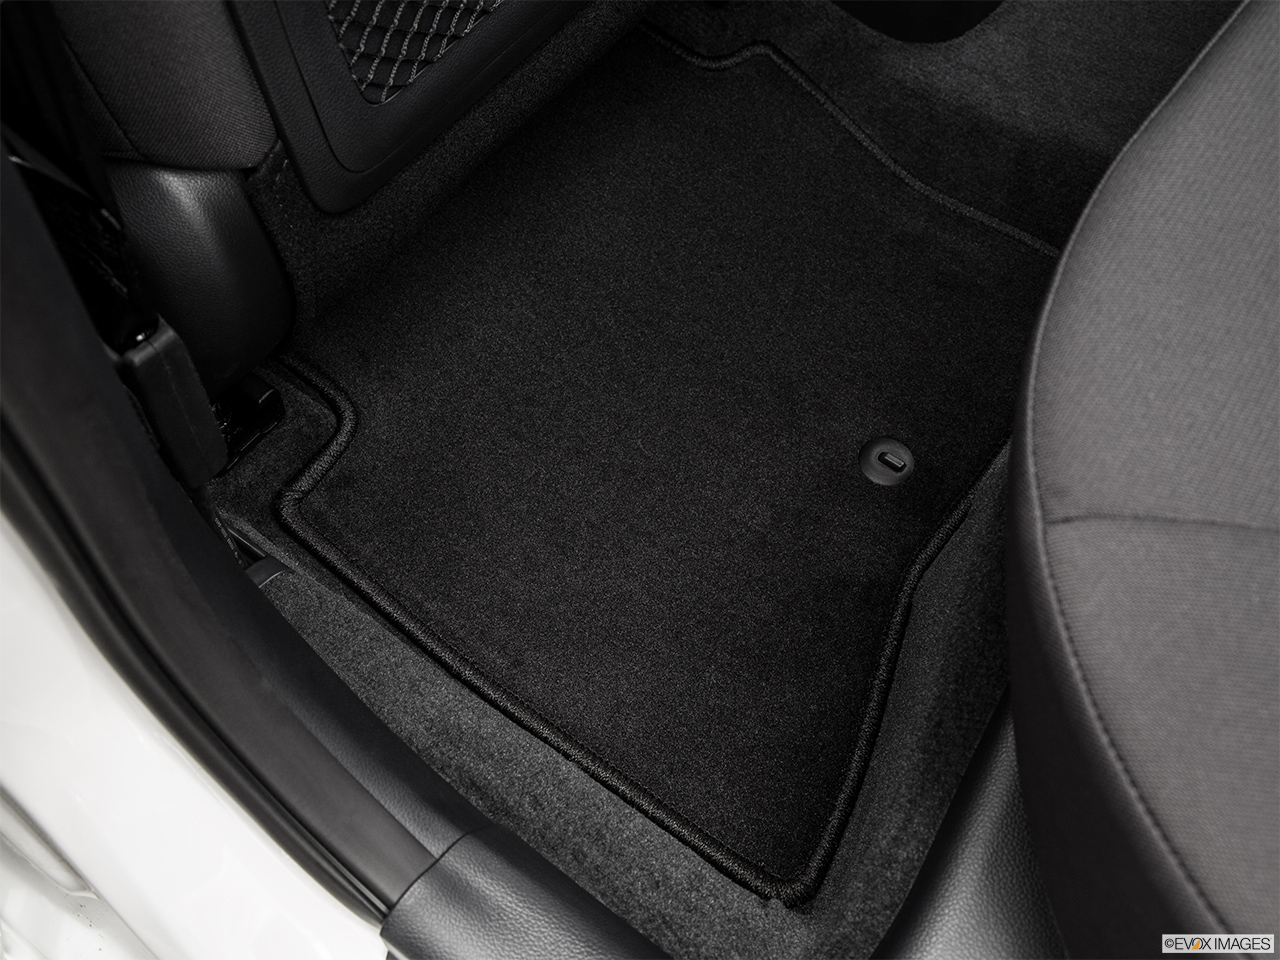 2017 Kia Rio 5-door LX Rear driver's side floor mat. Mid-seat level from outside looking in. 